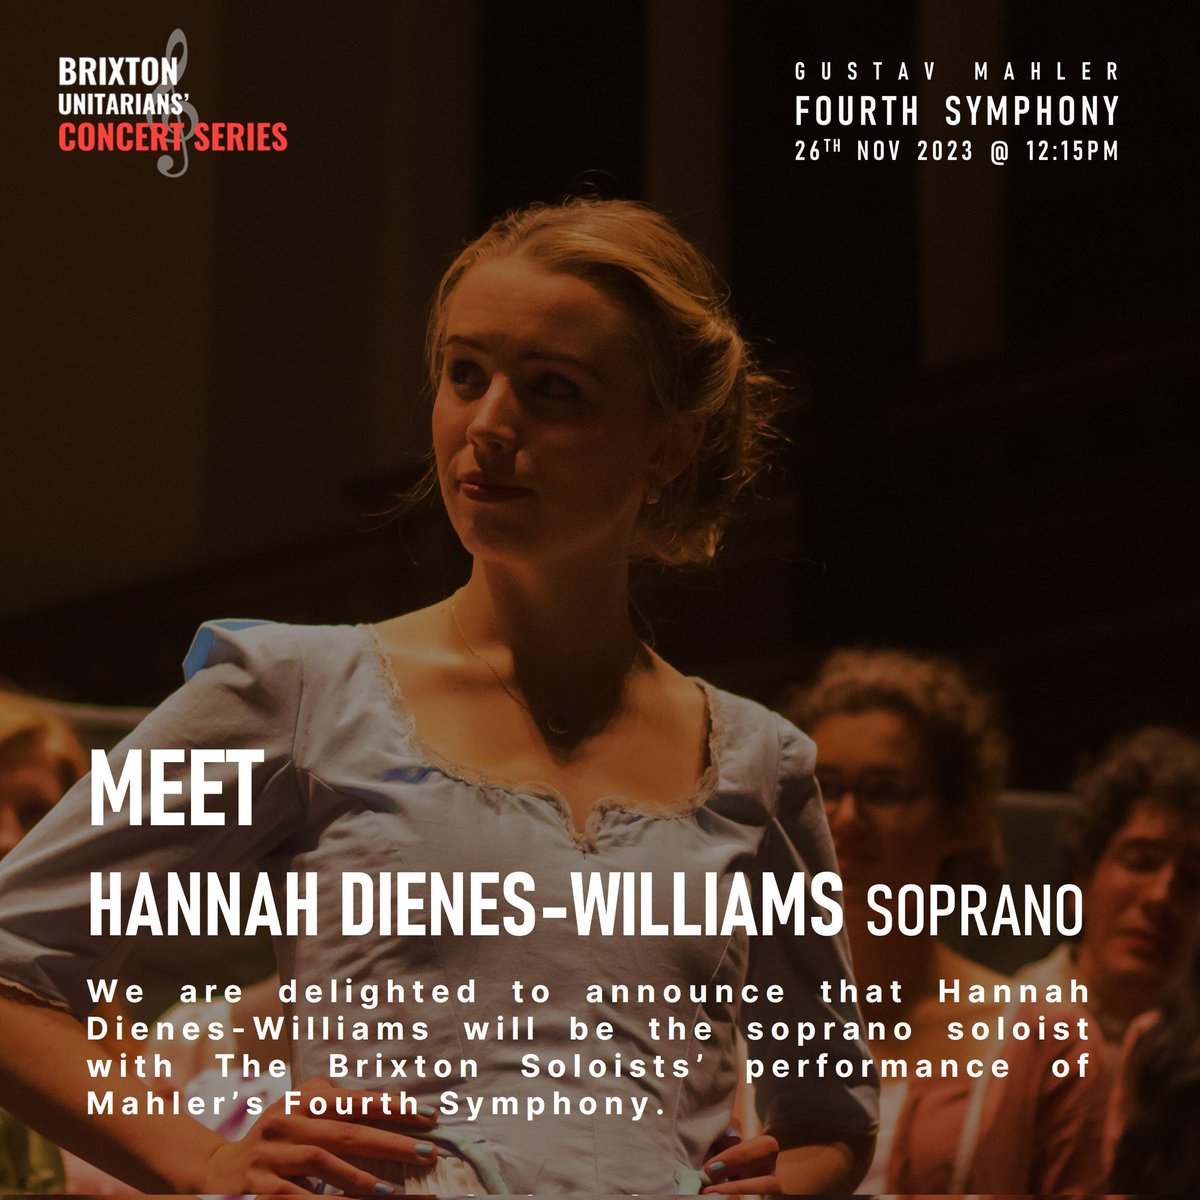 26TH NOV, 12:15pm! Super excited to announce that @hdienessoprano (formerly of @ClareChoir and @GuildCath) will be singing the solo from Mahler's Fourth Symphony. Prebook: bit.ly/3Py9H5Z